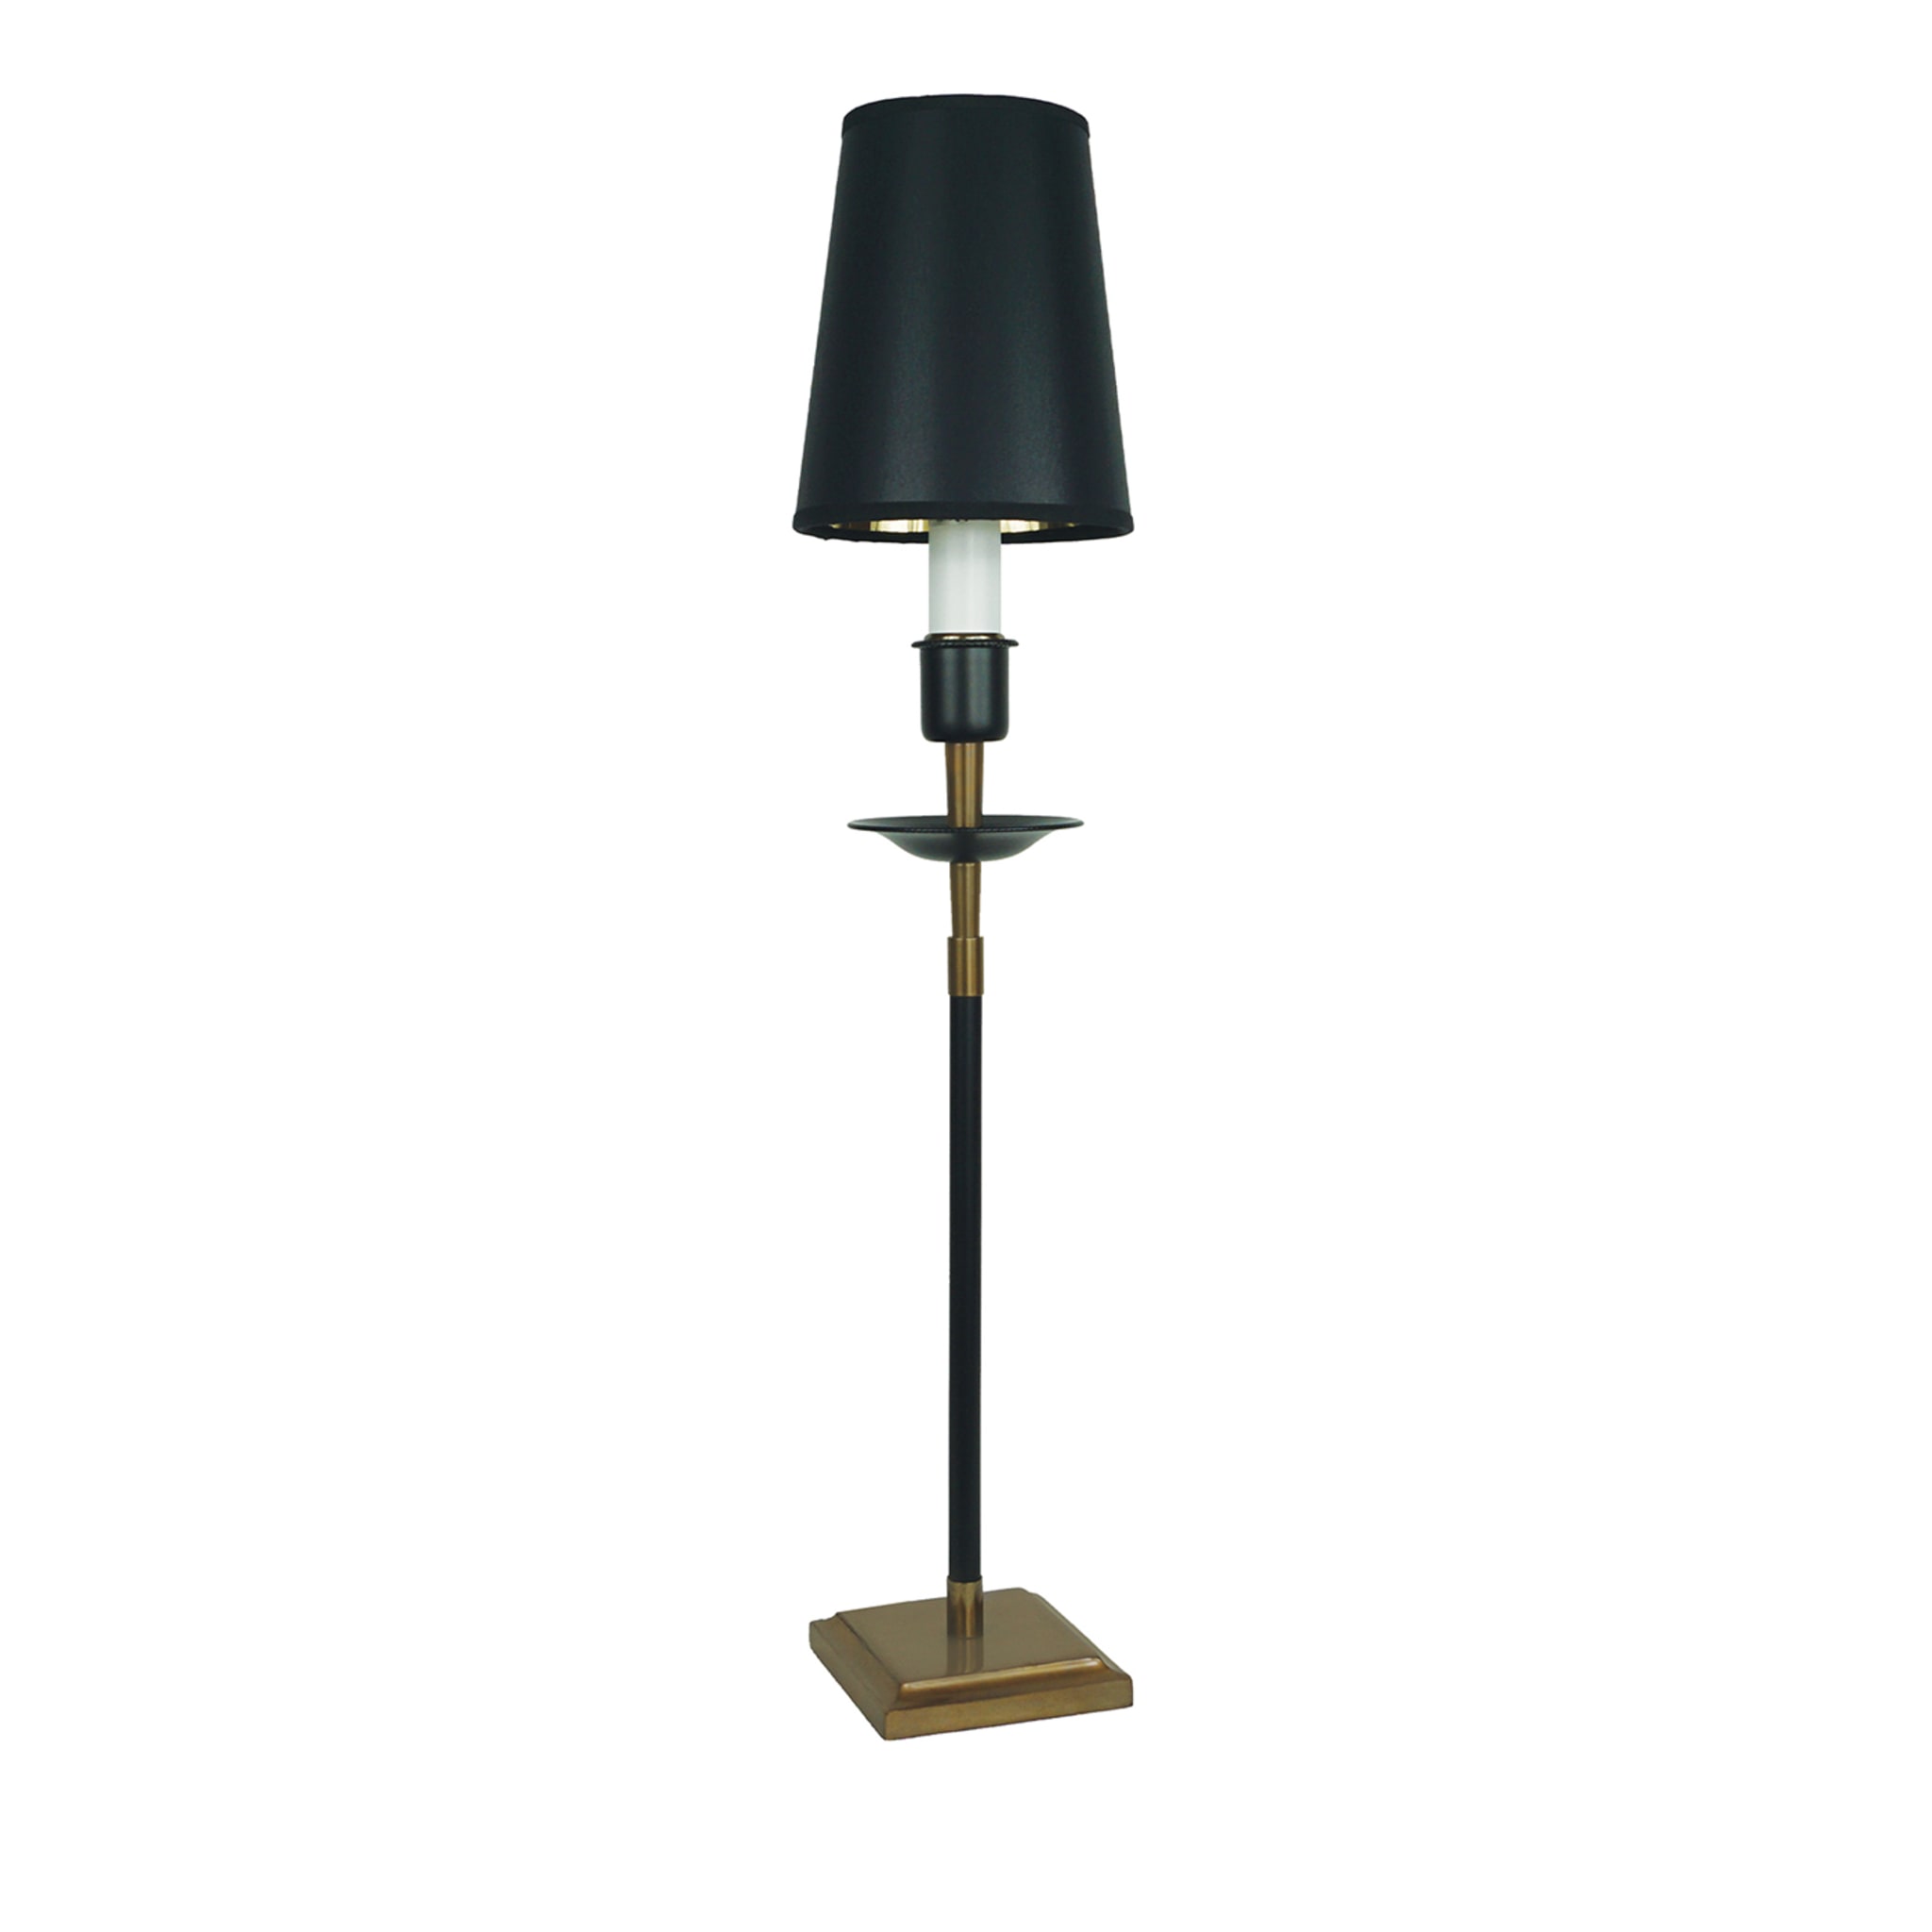 Nelly M273 Table Lamp by Michele Bönan - Main view